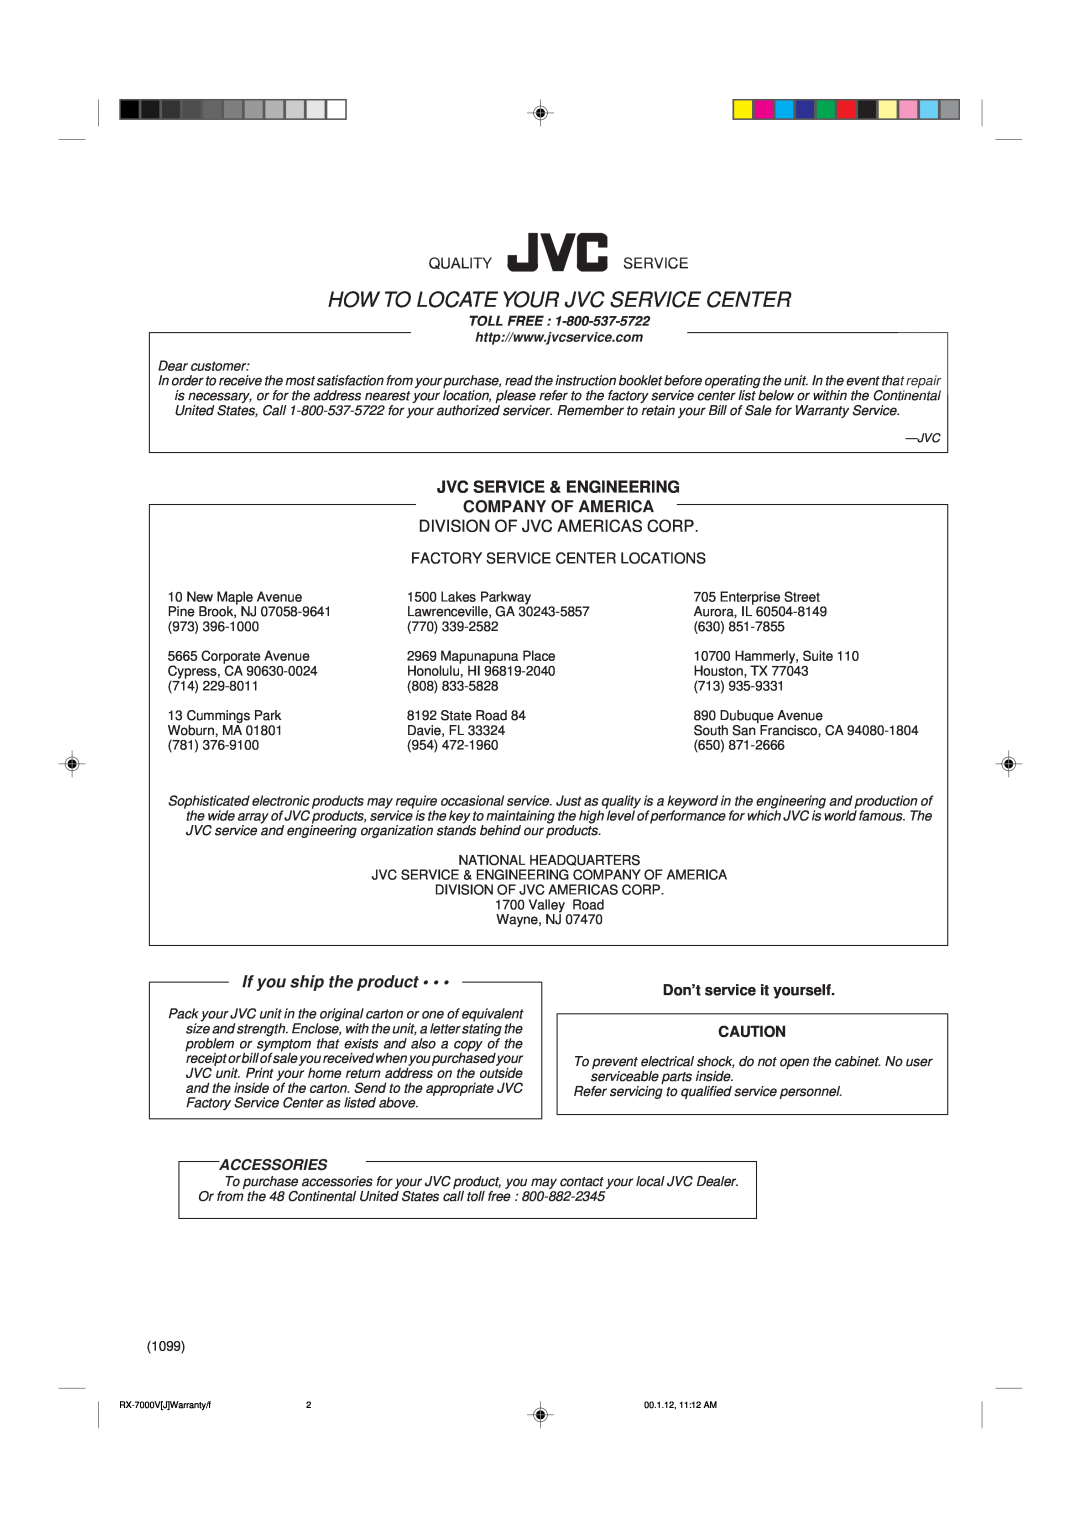 JVC RX-7000VBK manual How To Locate Your Jvc Service Center, Jvc Service & Engineering Company Of America, Qualityservice 